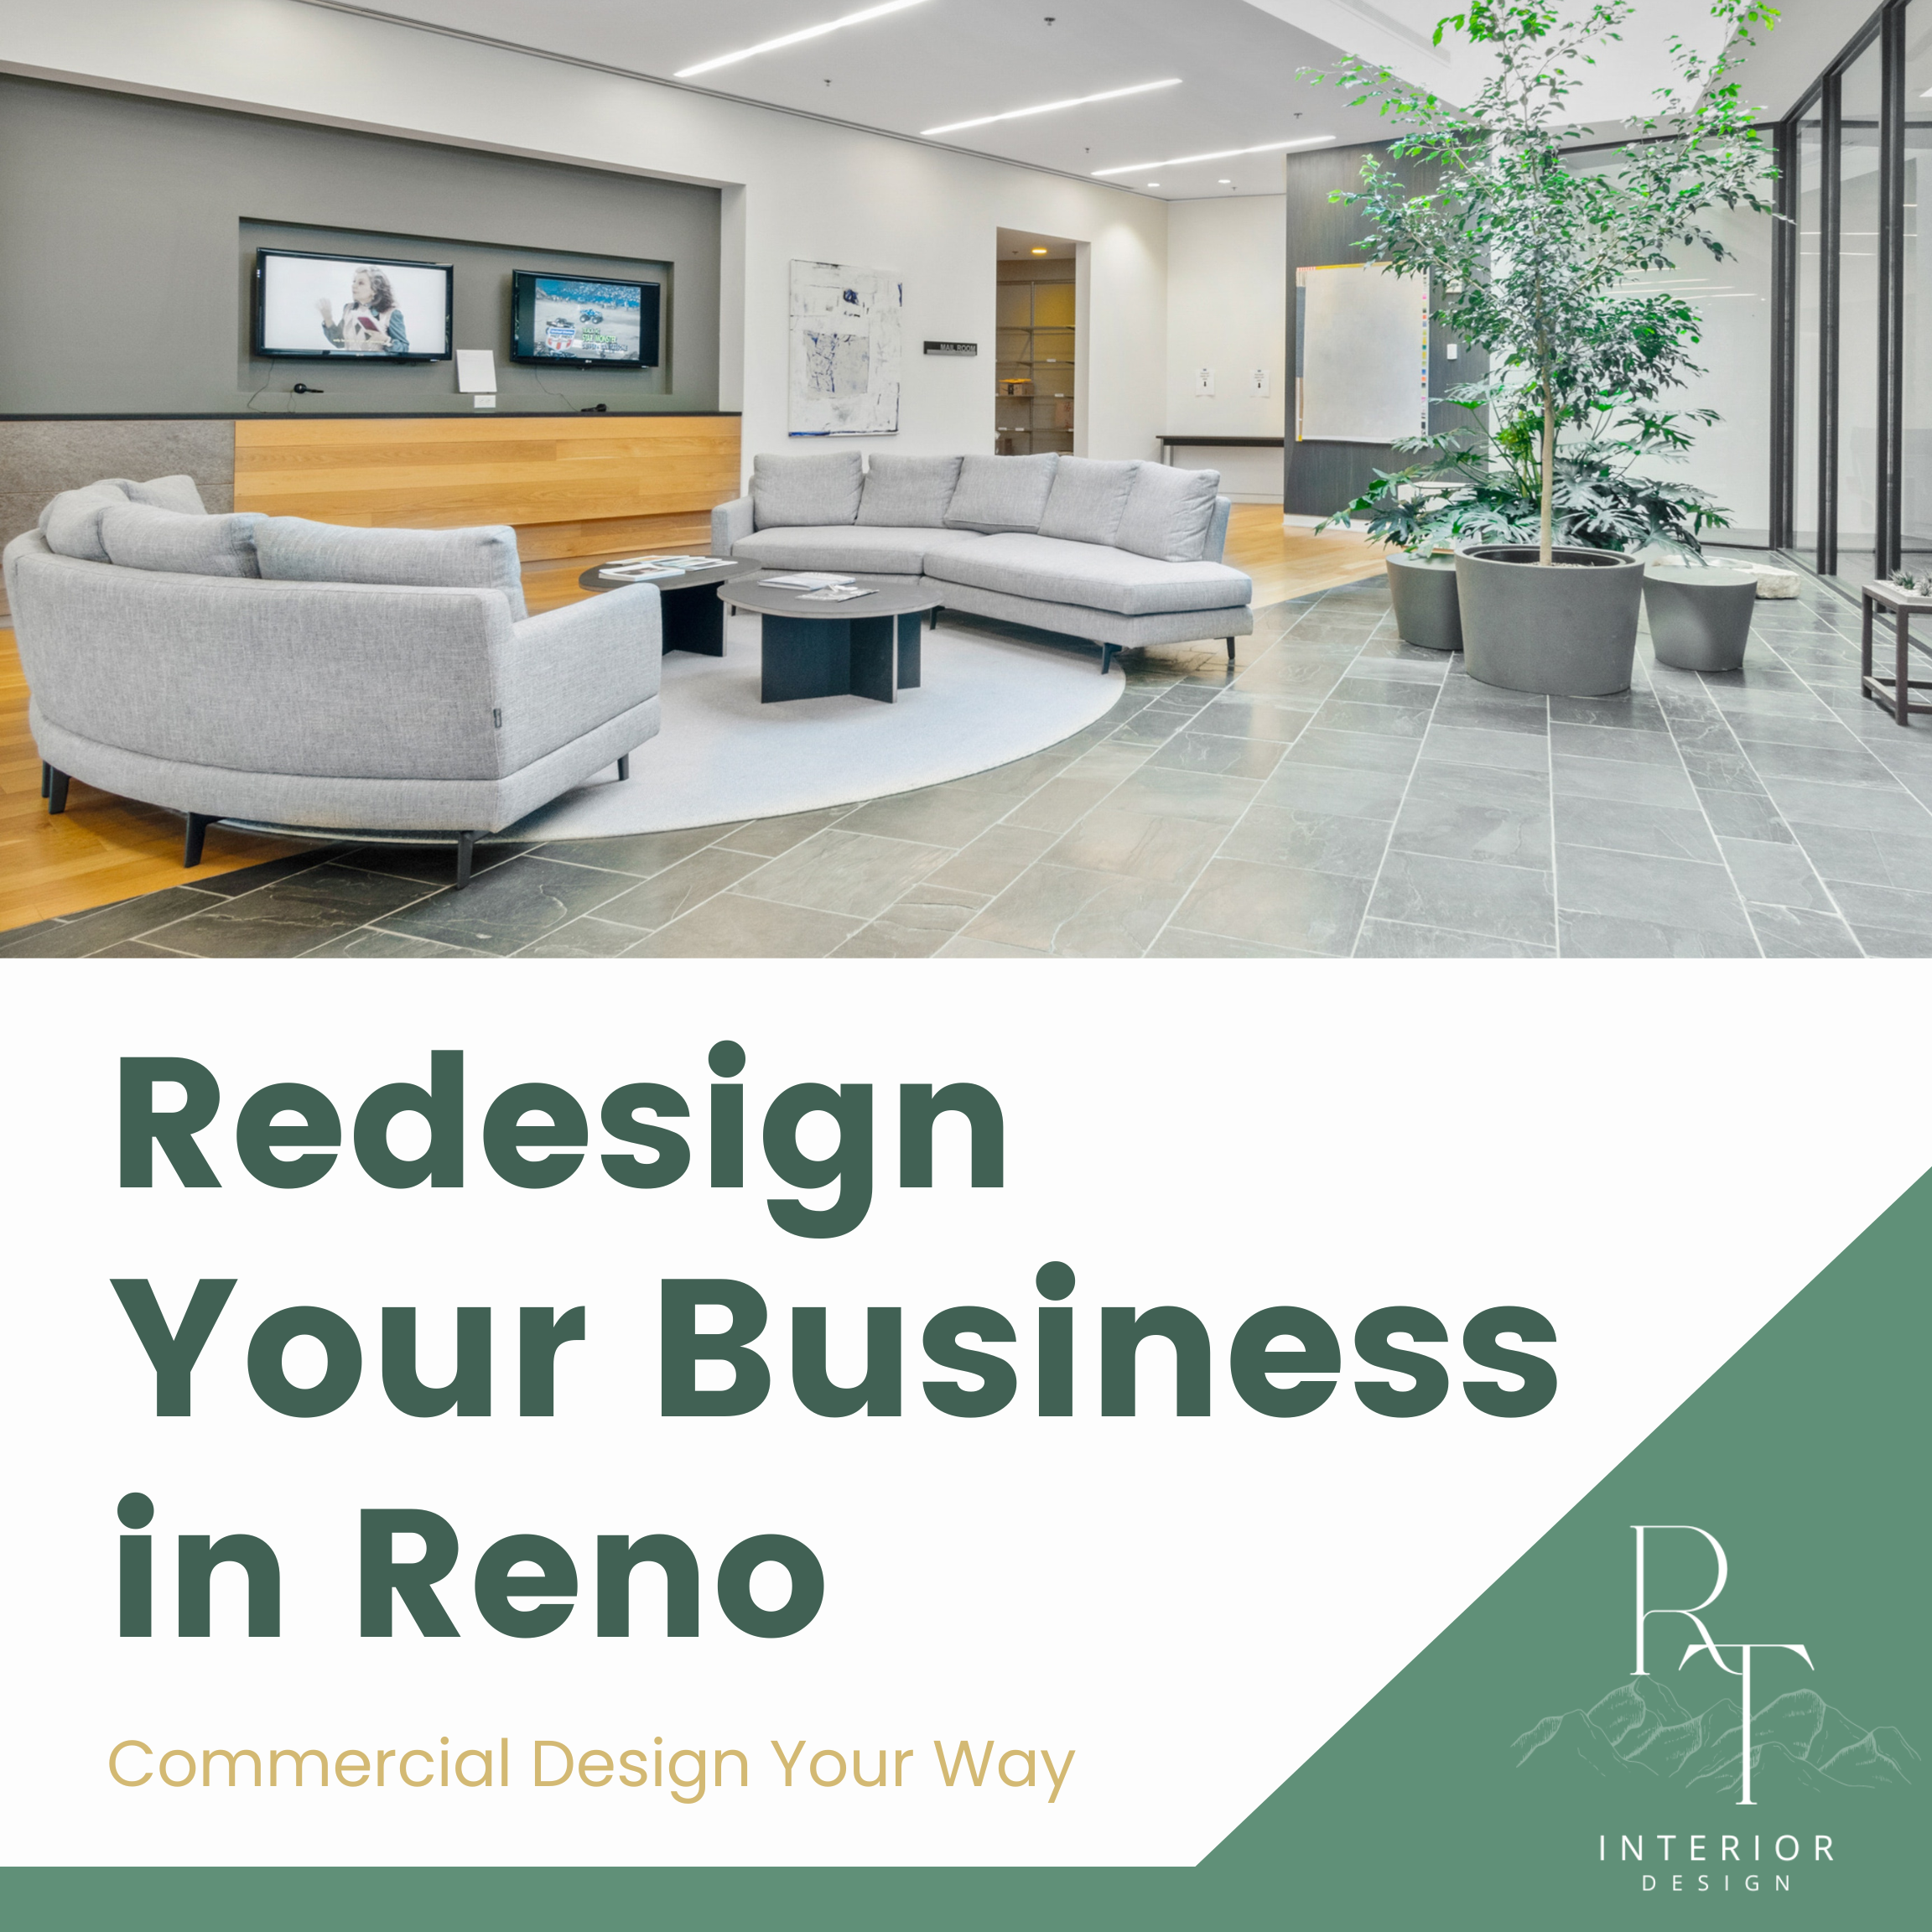 Redesign Your Business in Reno